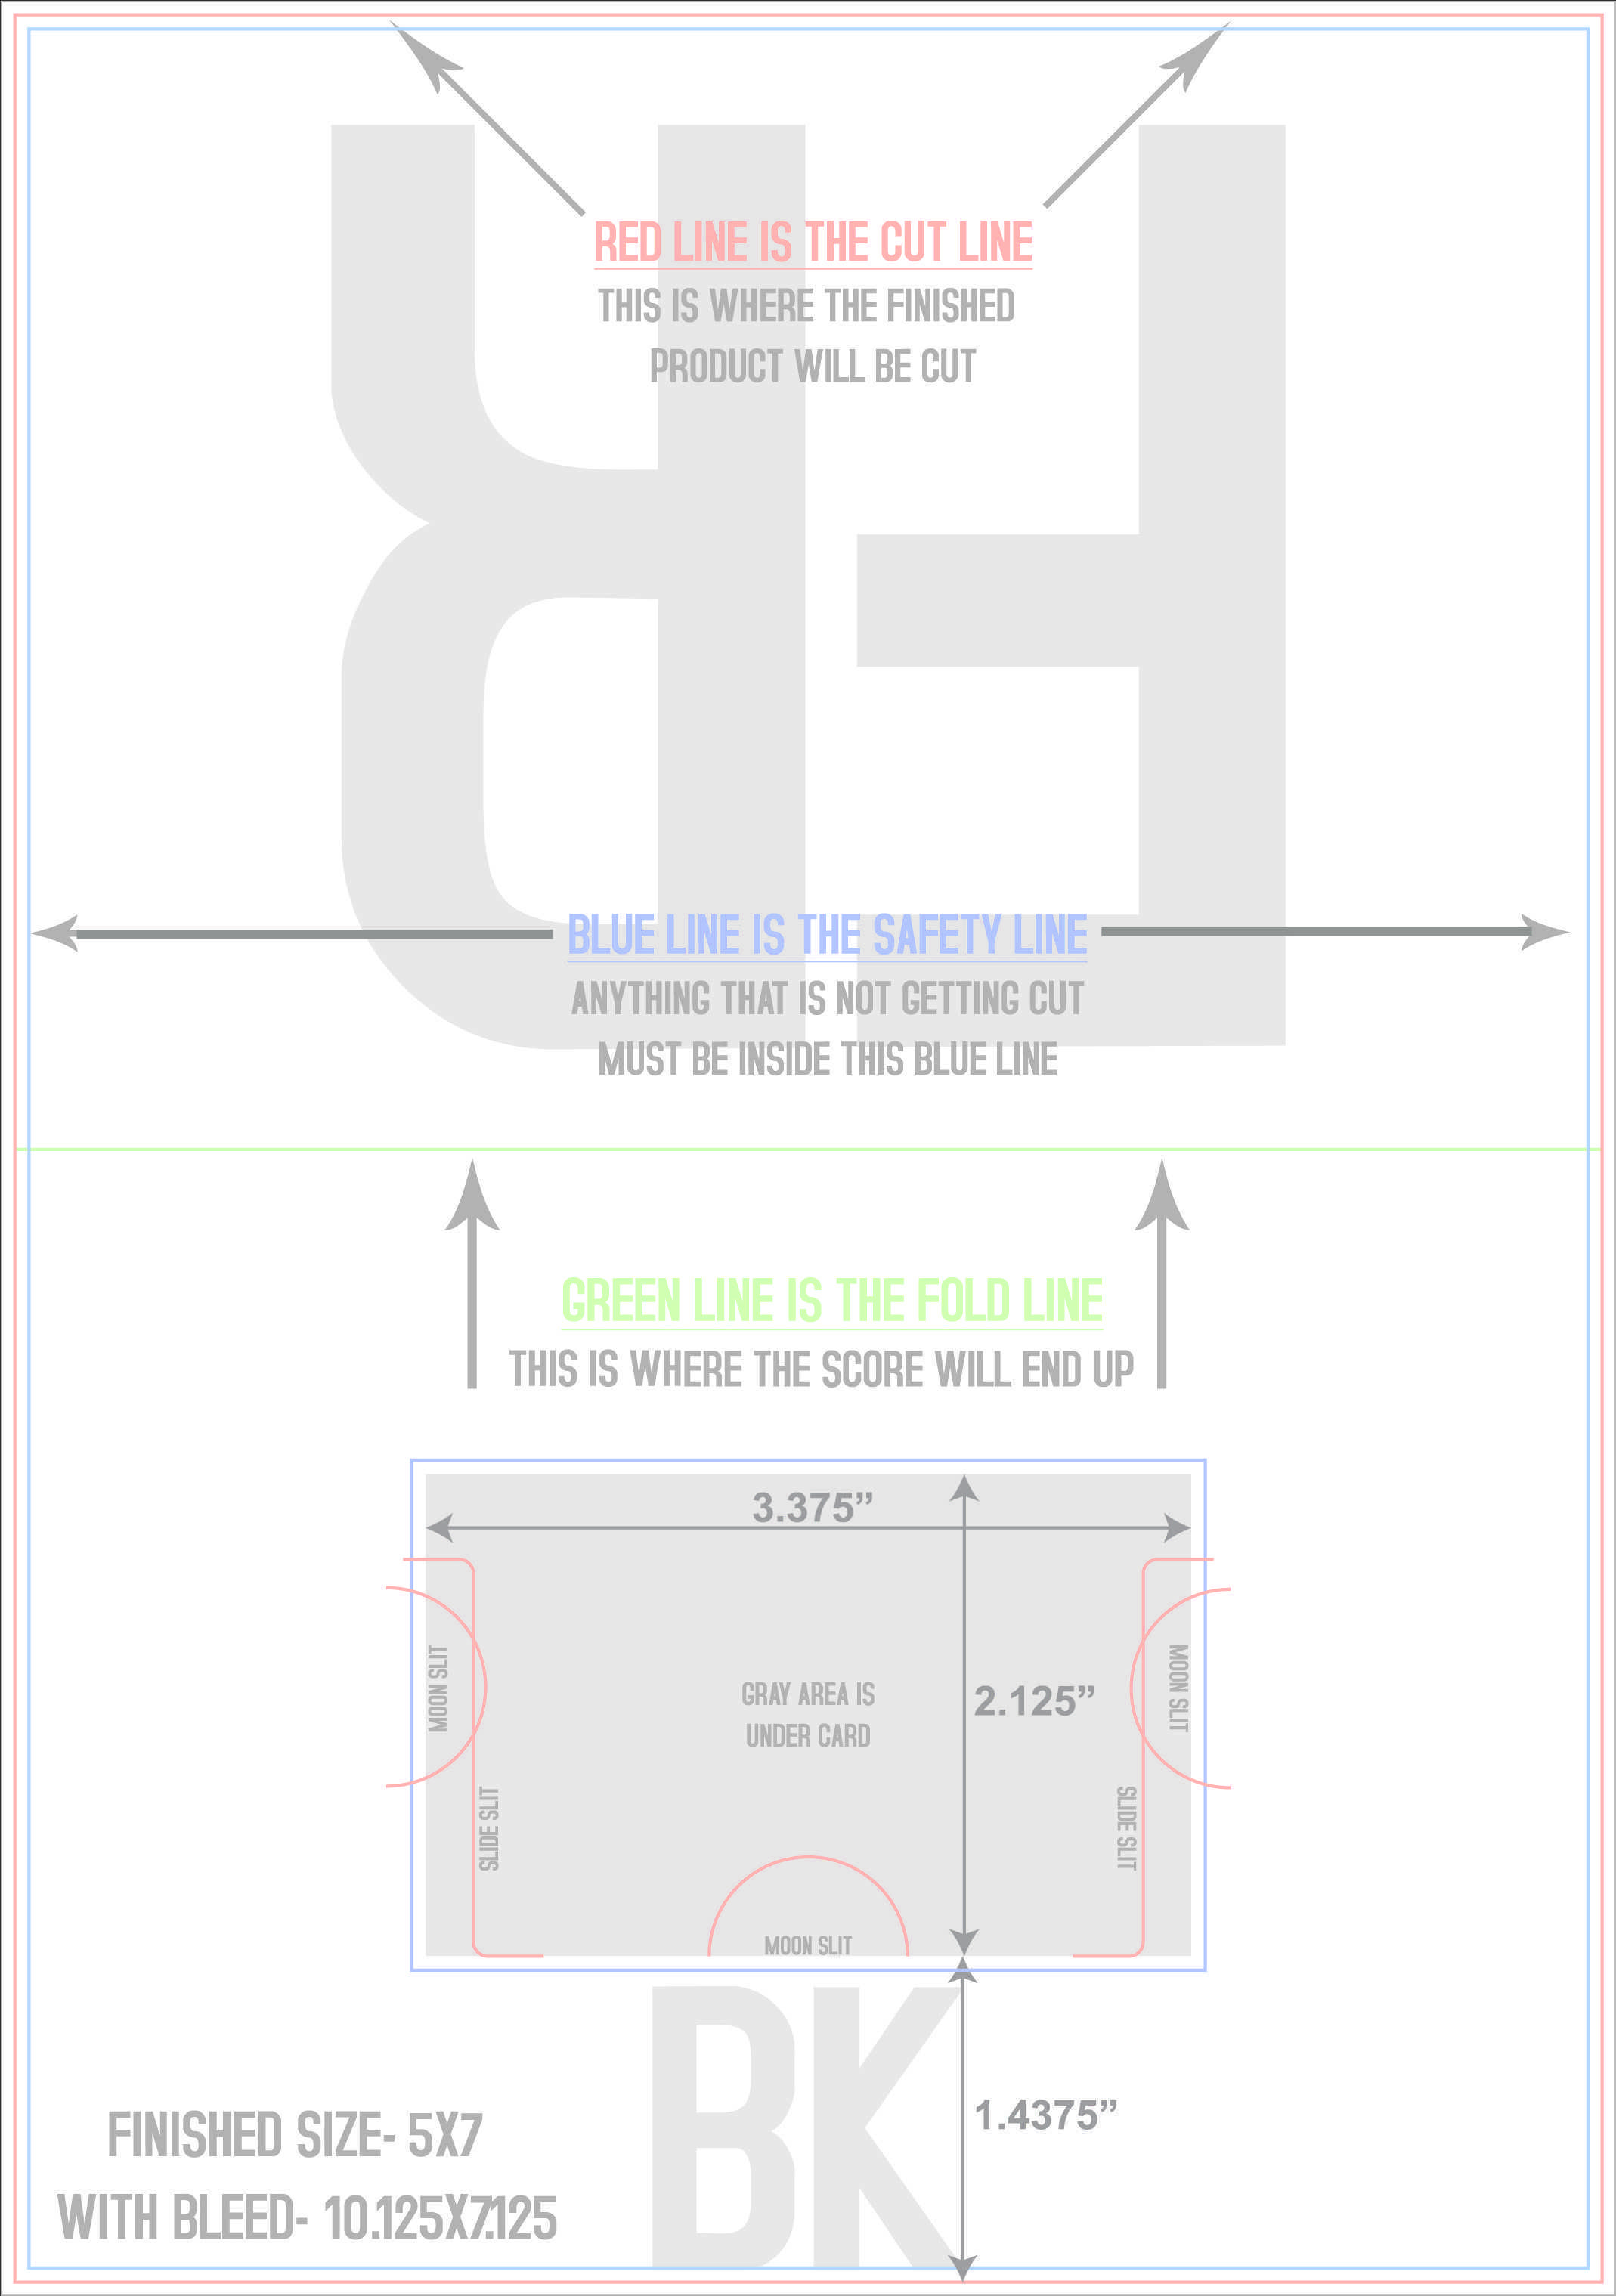 37 Standard Card Template 5 X 6 5 Now with Card Template 5 X 6 5